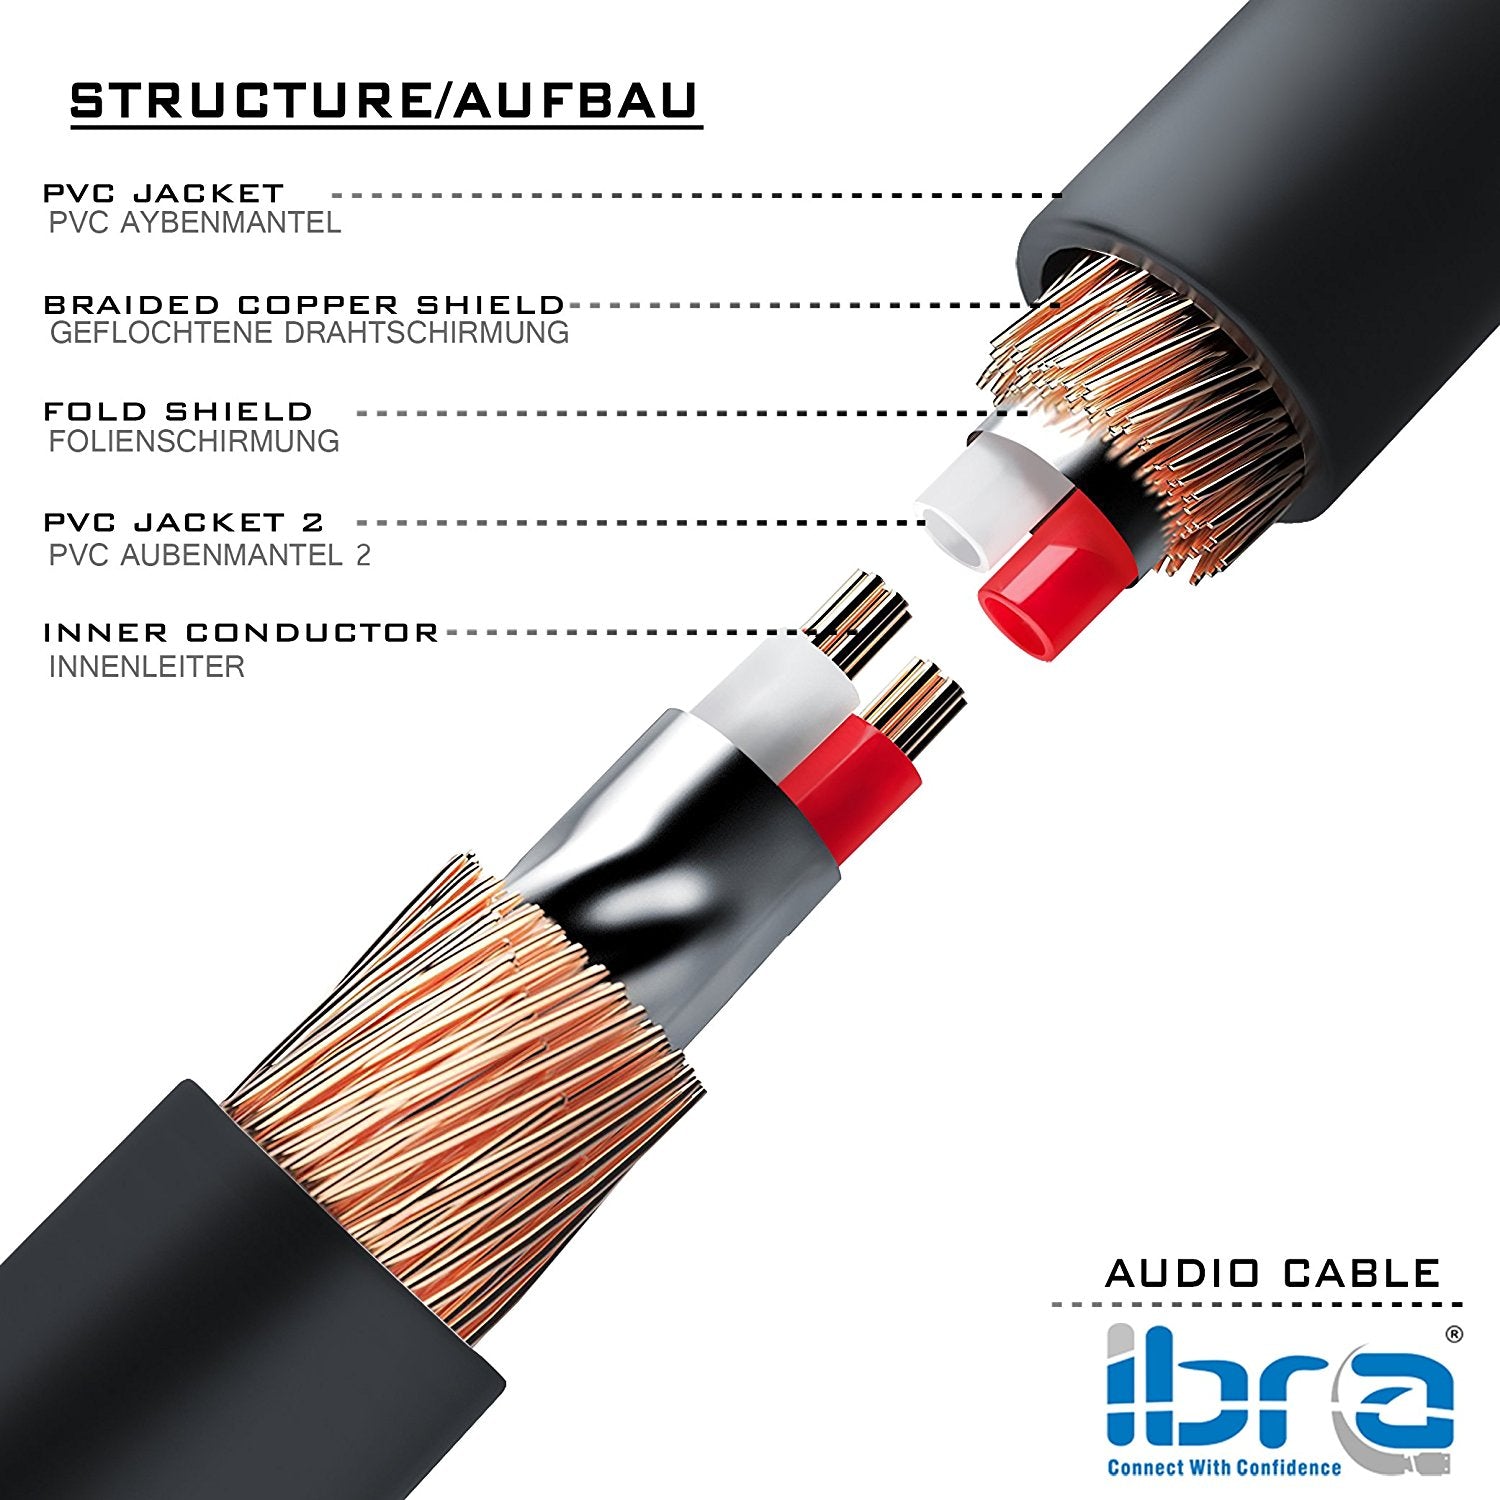 Aux Cable 2M 3.5mm Stereo Pro Auxiliary Audio Cable - for Beats Headphones Apple iPod iPhone iPad Samsung LG Smartphone MP3 Player Home / Car etc - IBRA Black